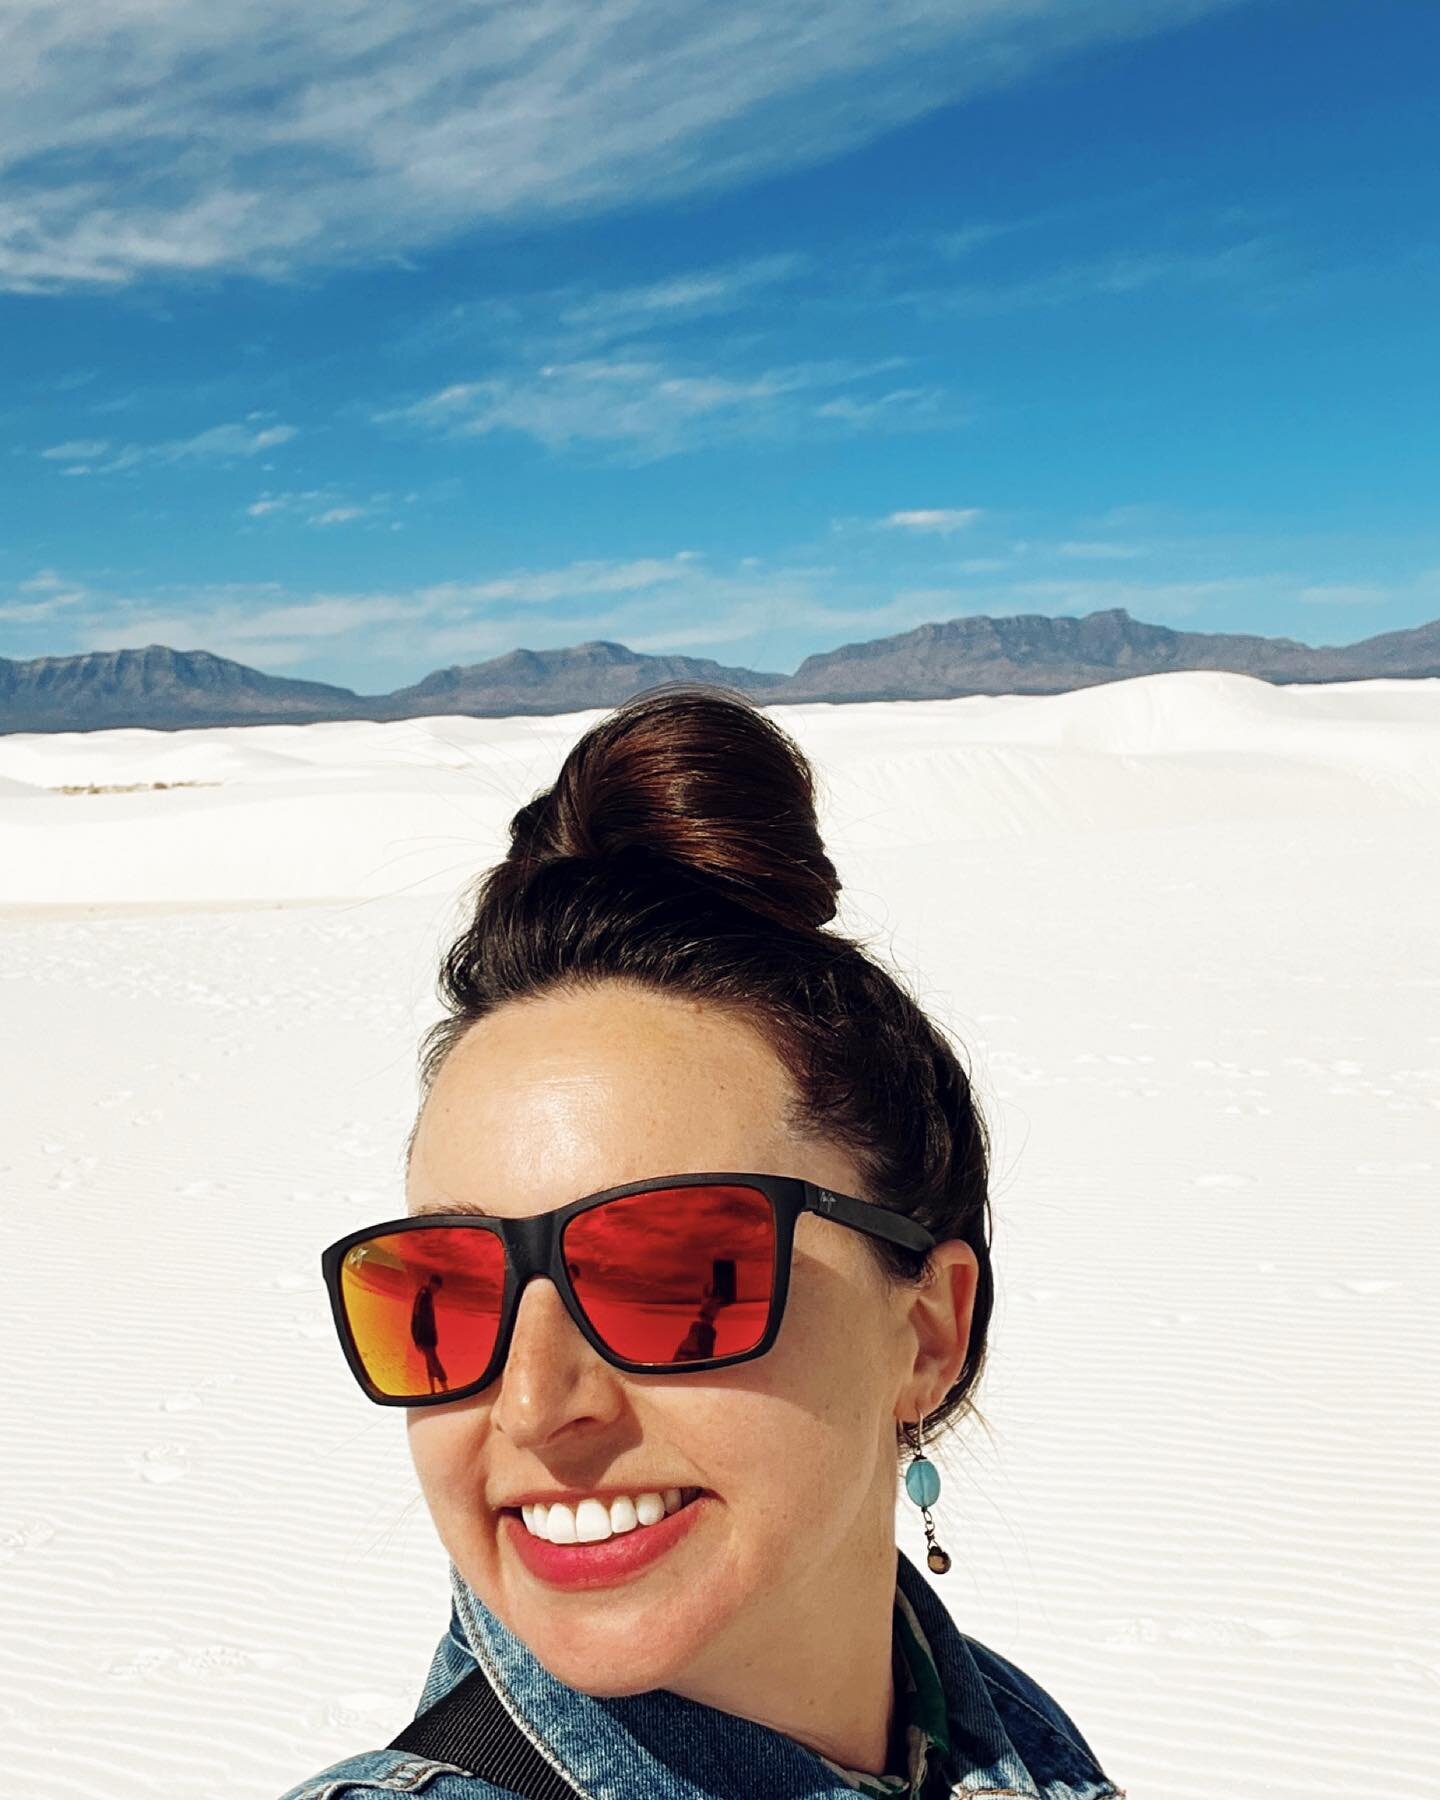 White Sands National Park in New Mexico
.
.
.
⛰️ Nestled in the heart of the Tularosa Basin lies White Sands National Park, a natural wonder that's both unique and breathtakingly beautiful

💯 What sets this park apart from other national parks is it